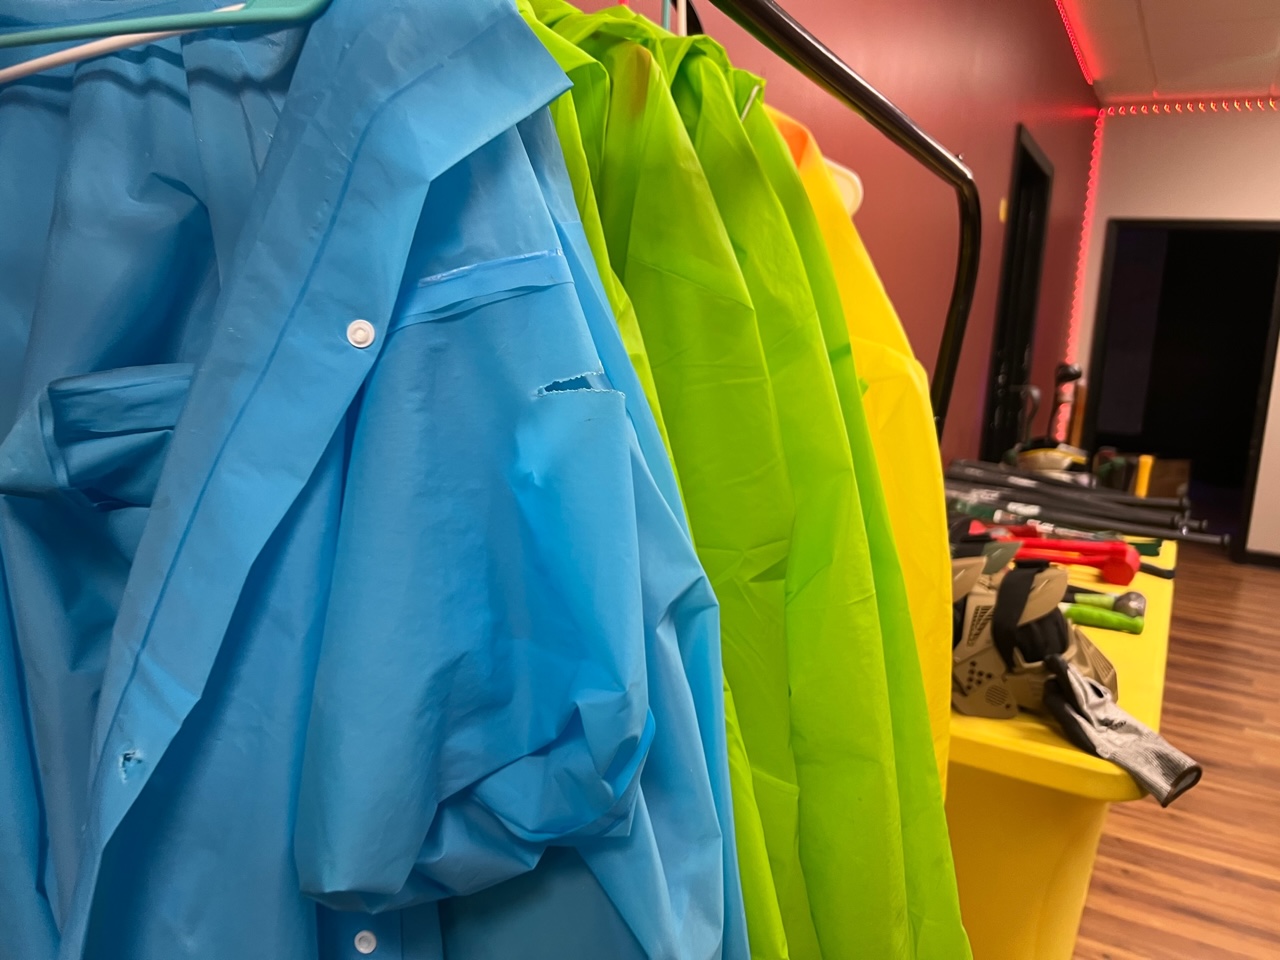 Colorful ponchos of blue, green, and yellow hang on a small rack at Rage Room Champaign on the left side of the photo. Behind the hanging ponchos, there is a yellow table with helmets and weapons. Photo by Alyssa Buckley.